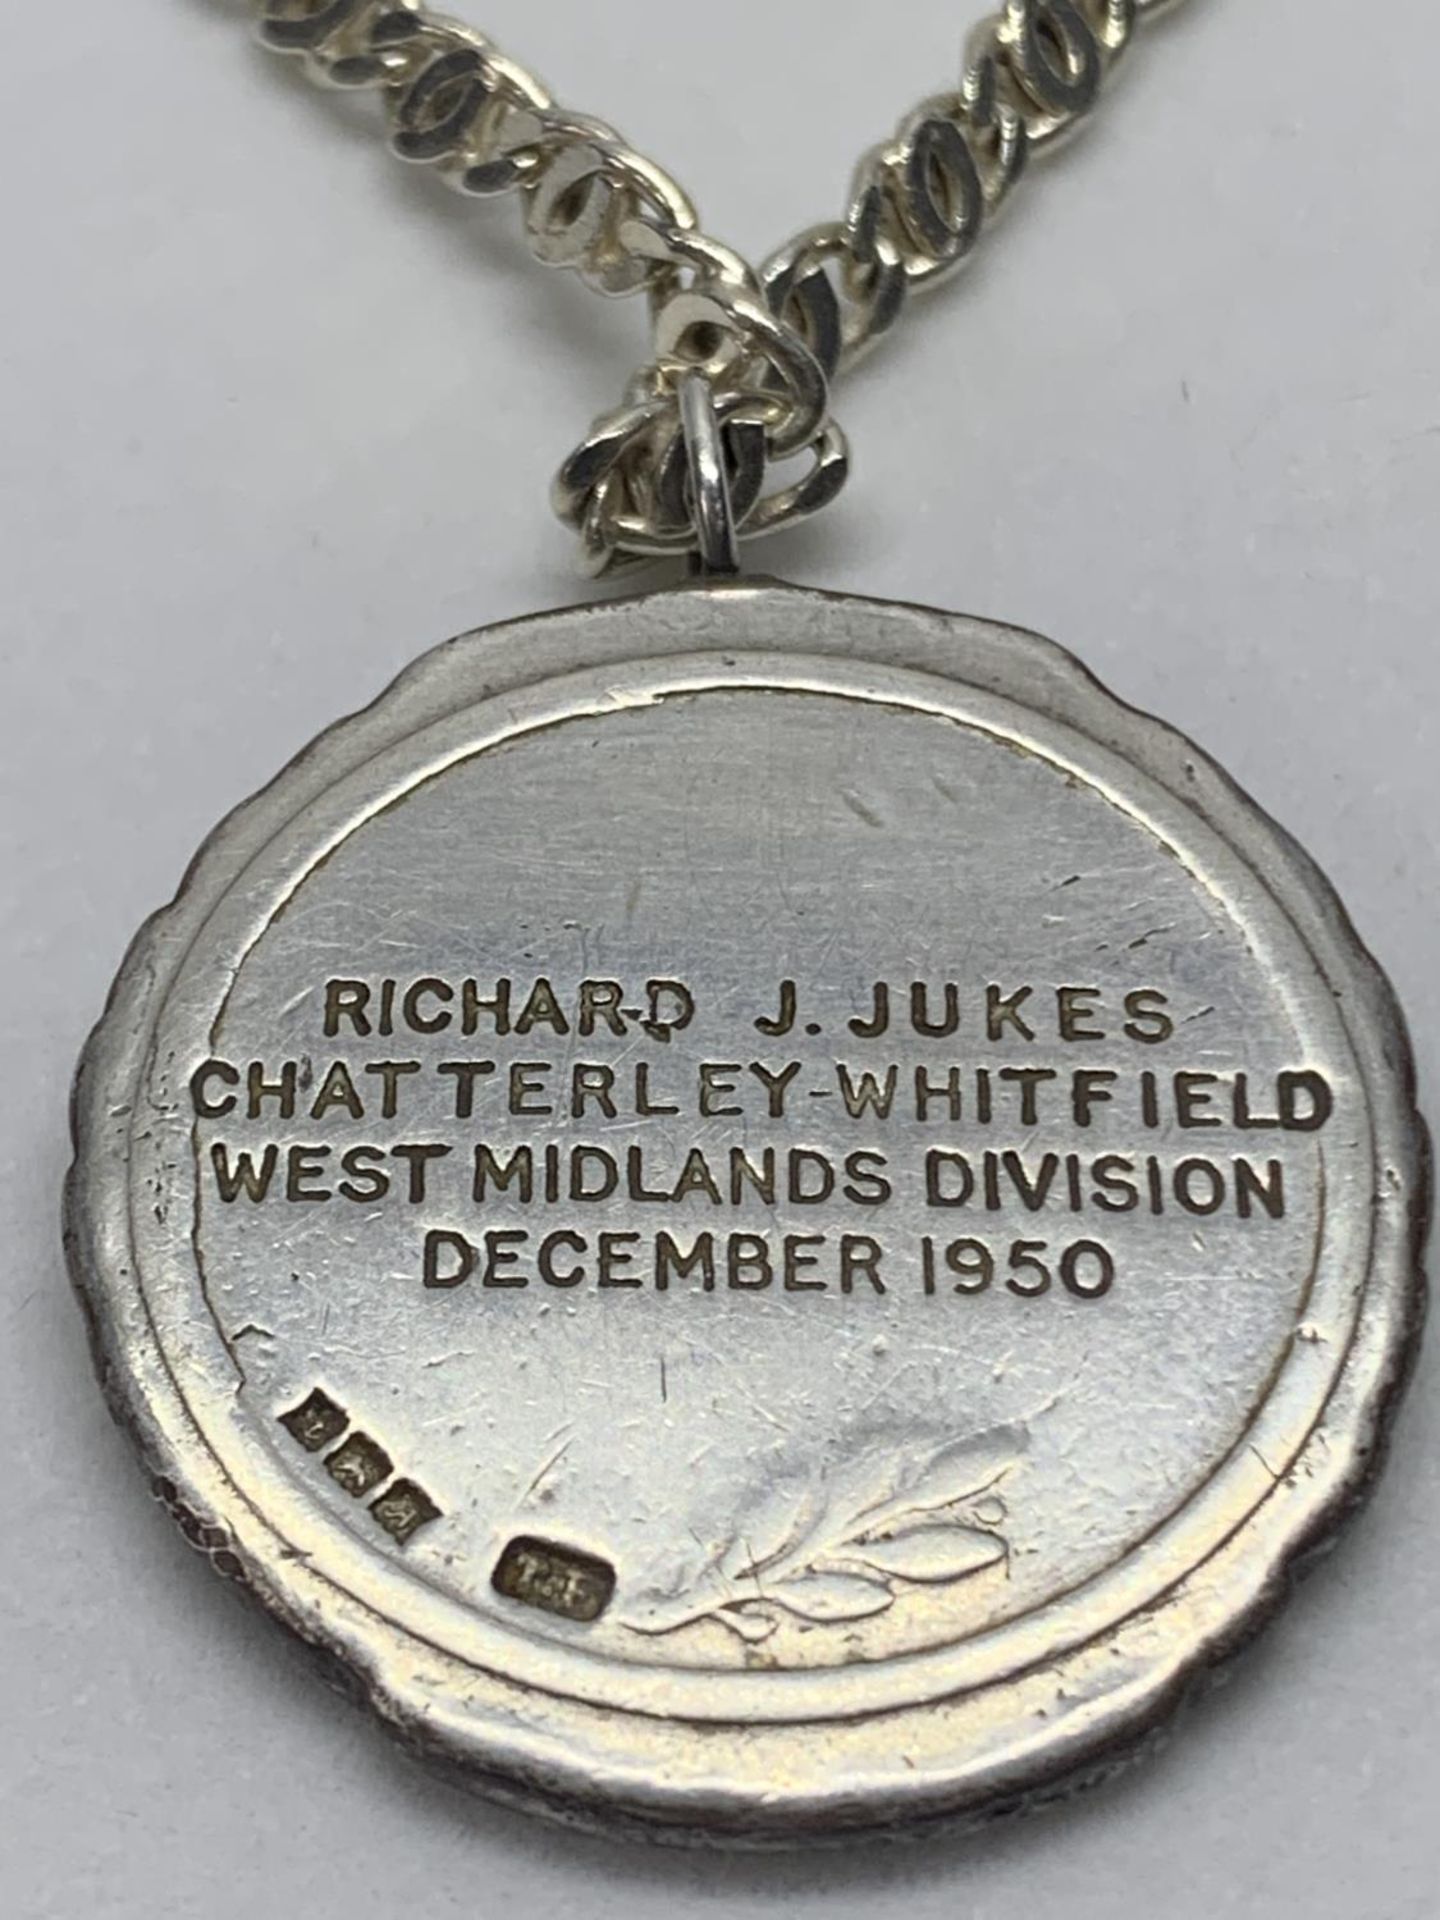 A SILVER NECKLACE WITH A HALLMARKED BIRMINGHAM SILVER MINERS MEDAL IN A PRESENTATION BOX - Image 3 of 3